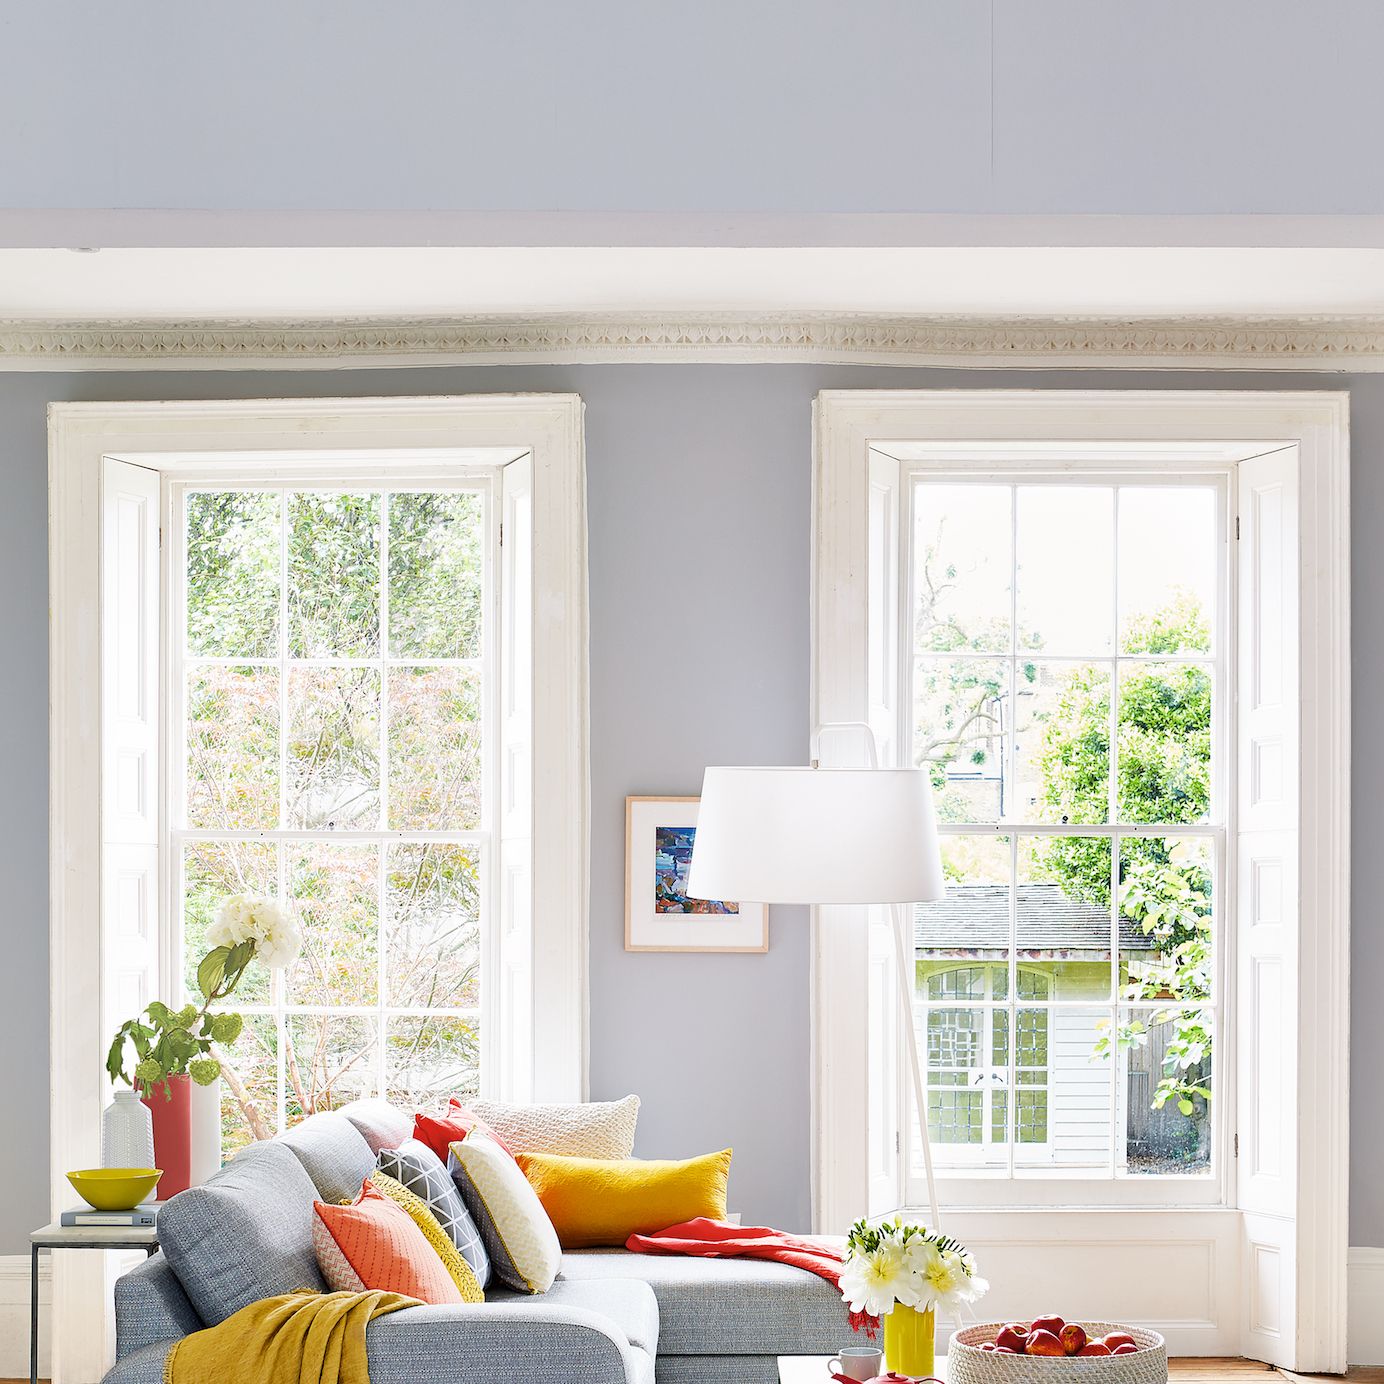 Grey Is Wilko's Best-Selling Paint Colour For The Home